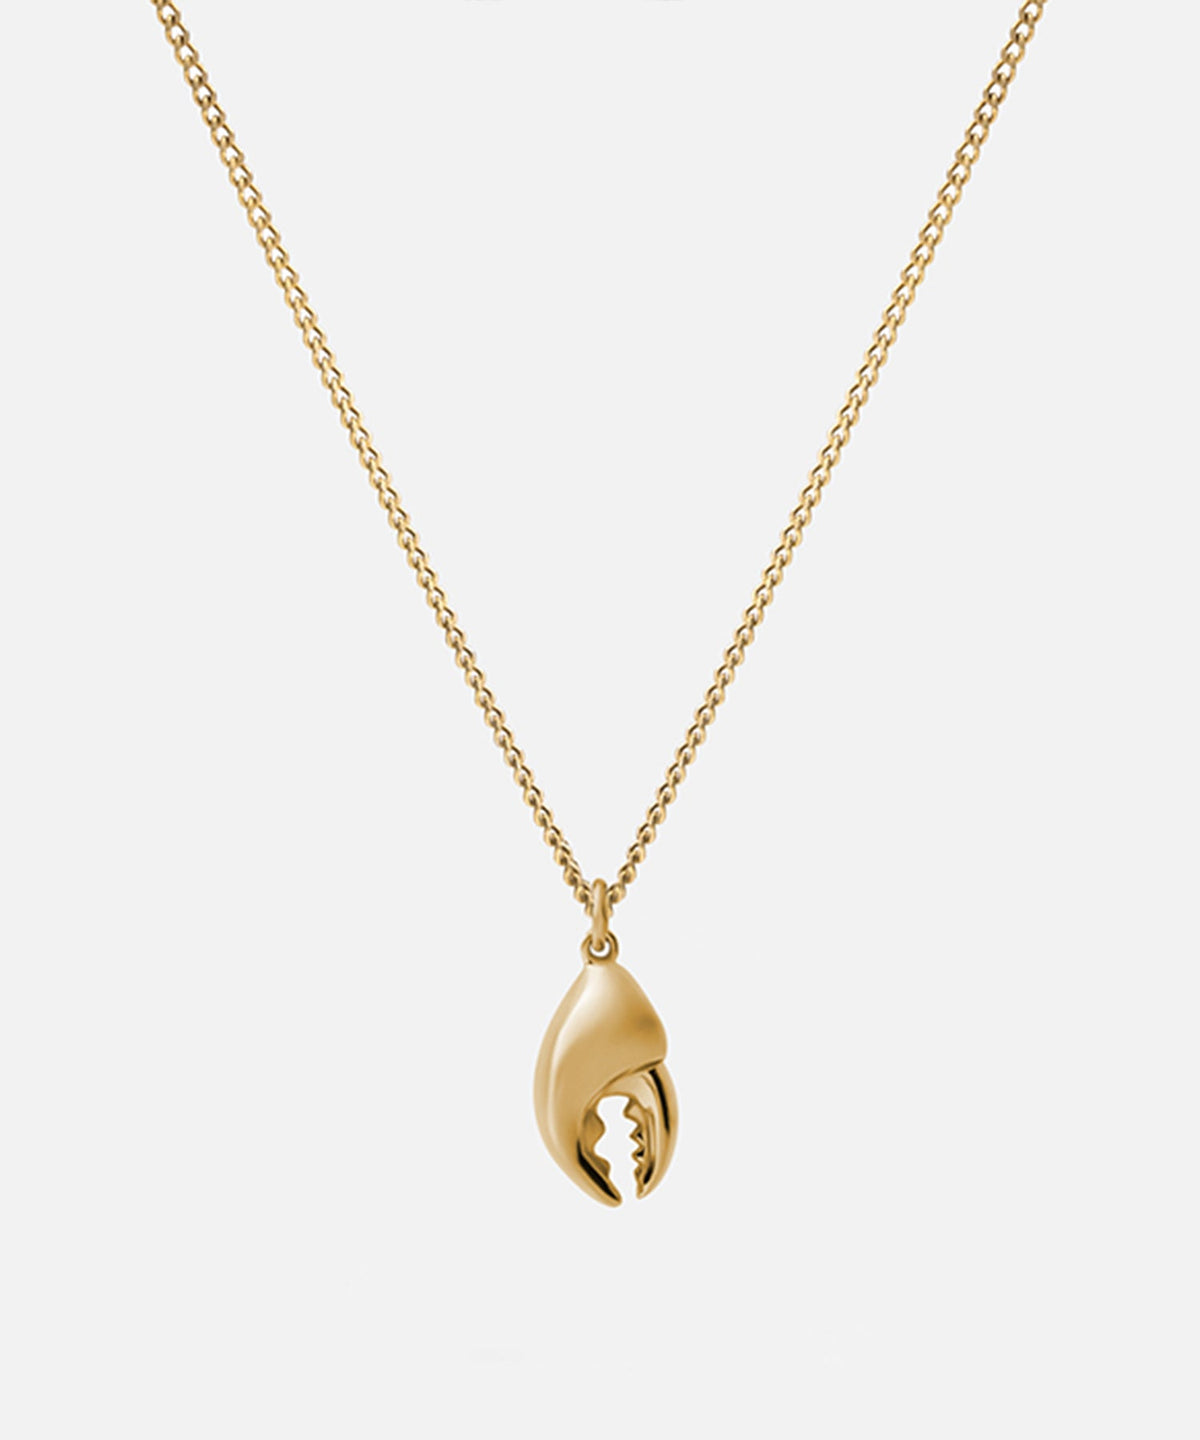 Miansai Lobster Claw Pendant Necklace in Gold